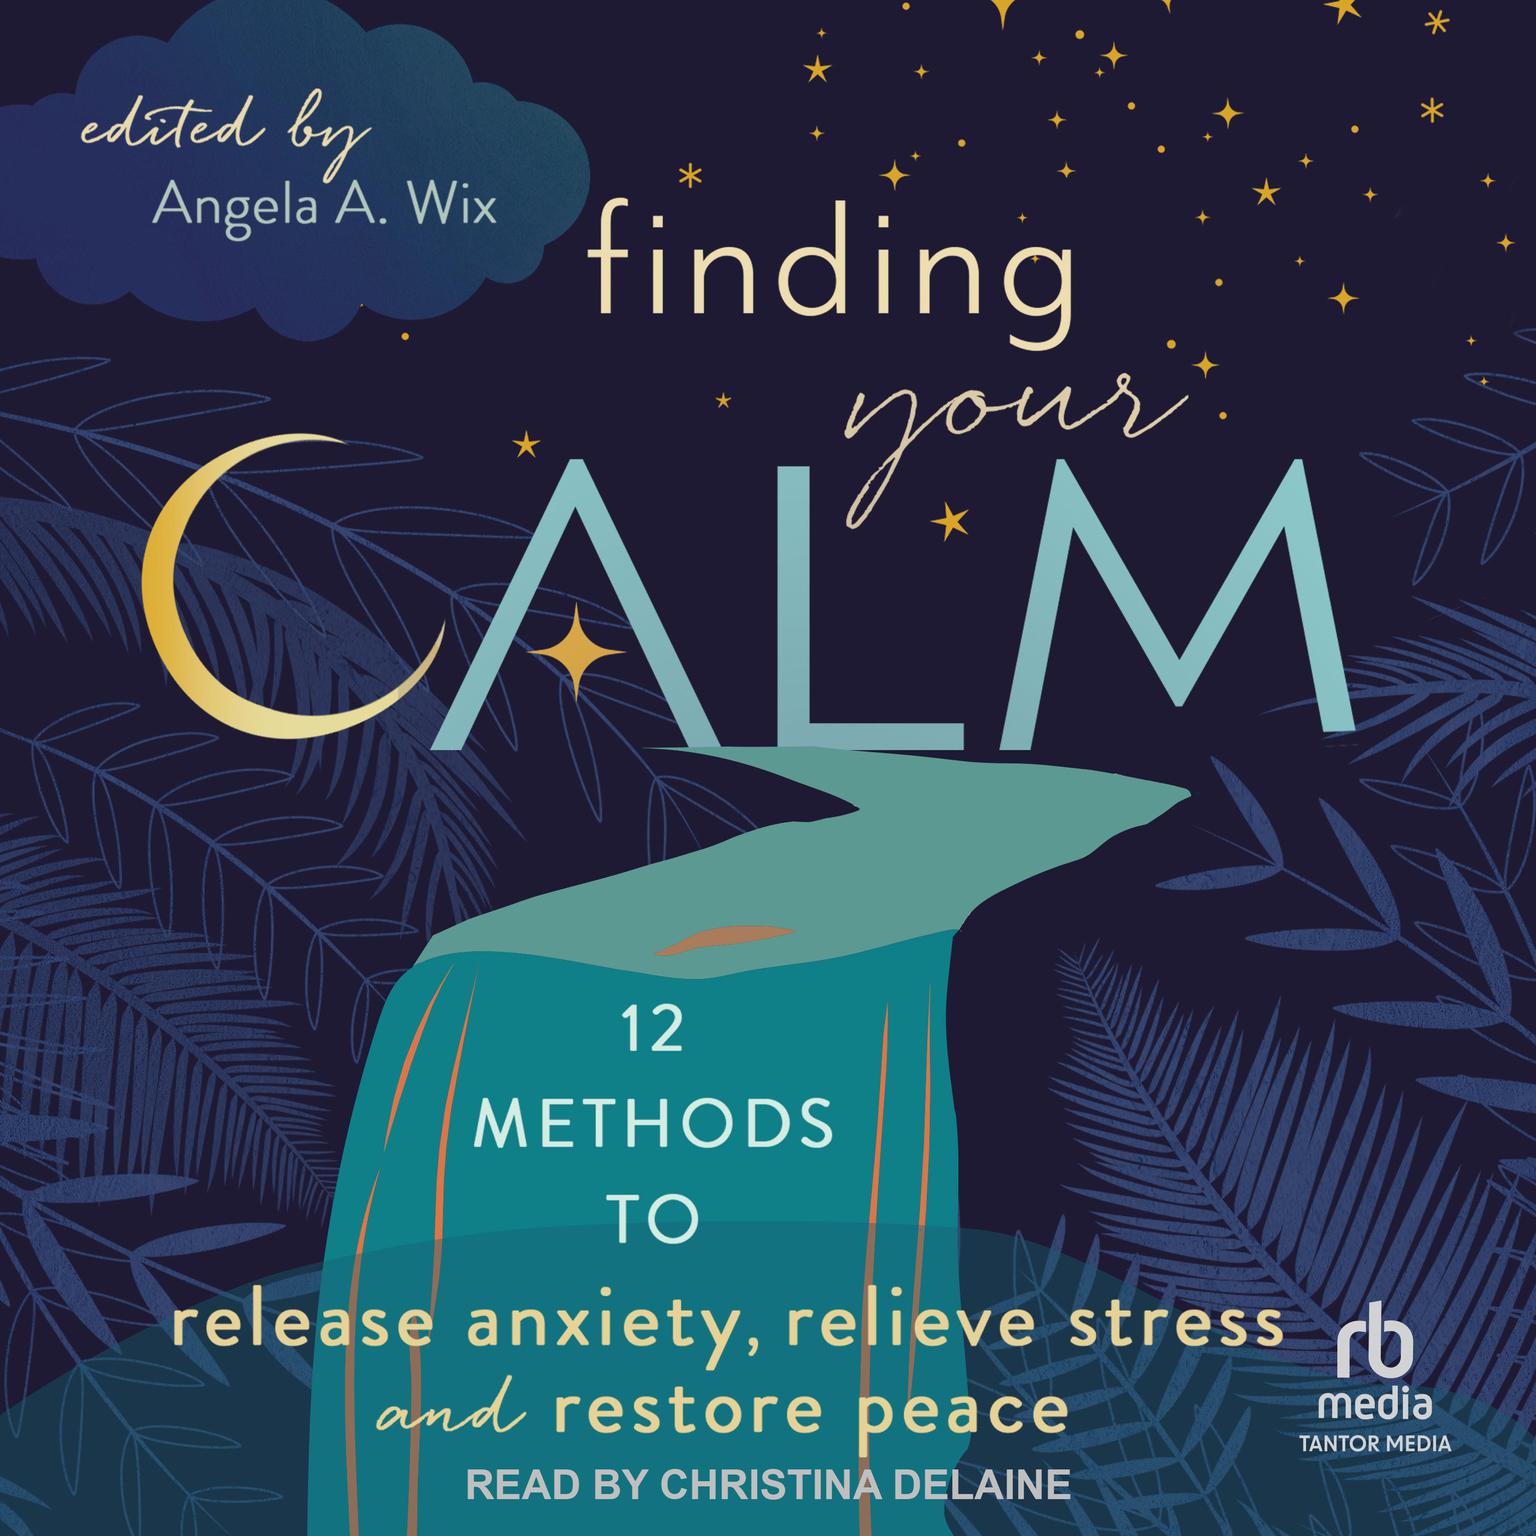 Finding Your Calm: Twelve Methods to Release Anxiety, Relieve Stress & Restore Peace Audiobook, by Angela A. Wix